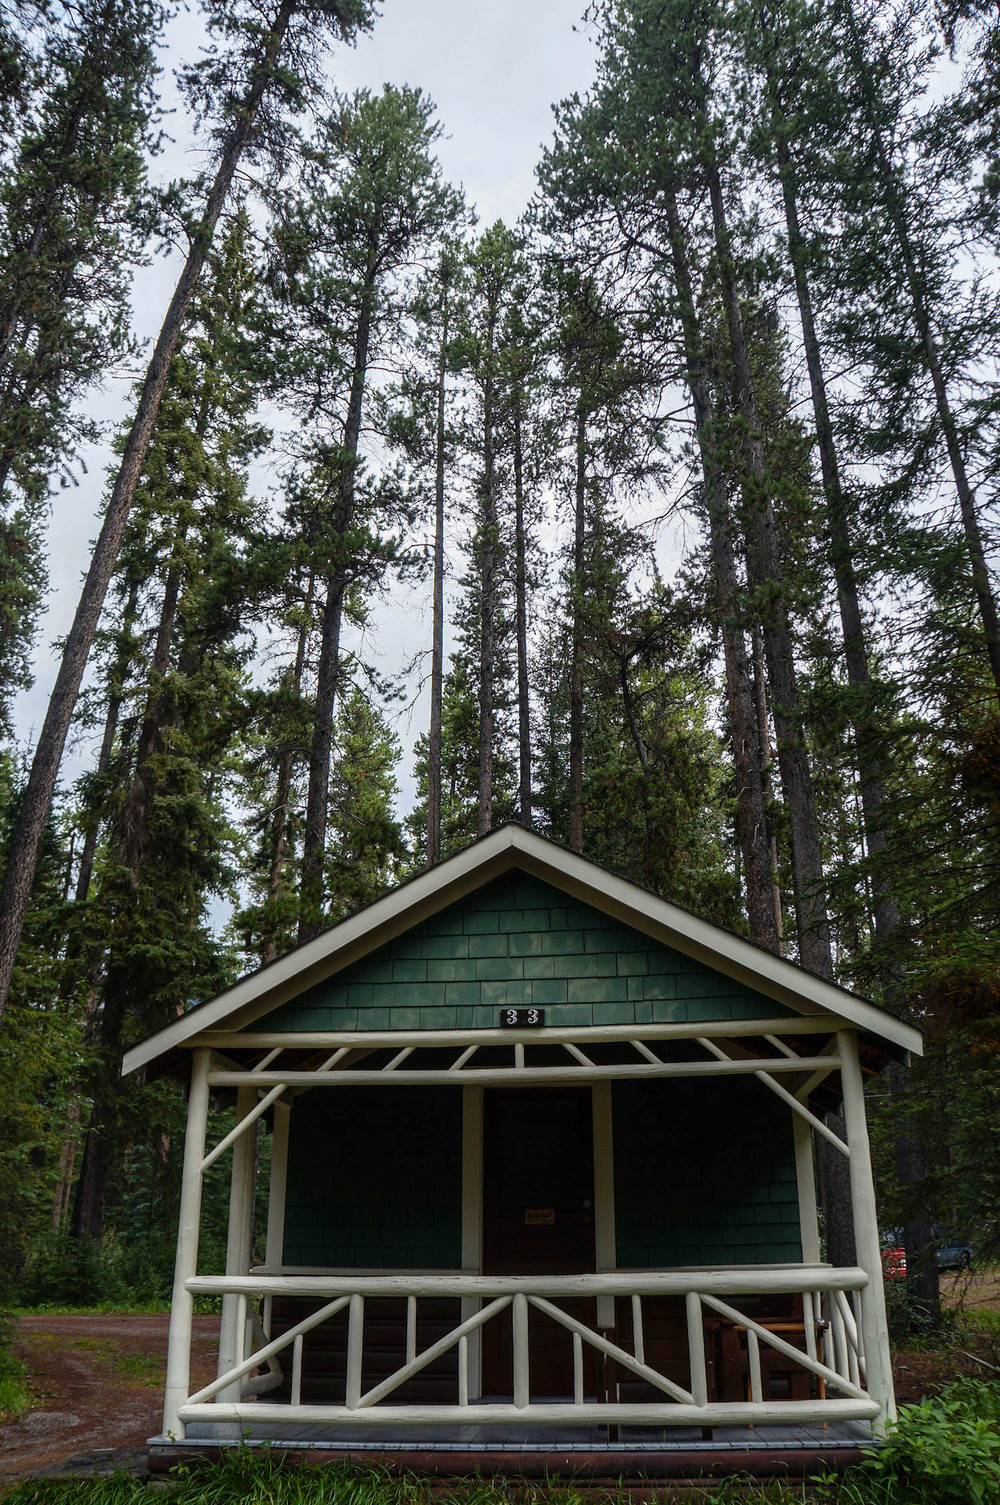  Our cabin at the Johnston Canyon Resort 